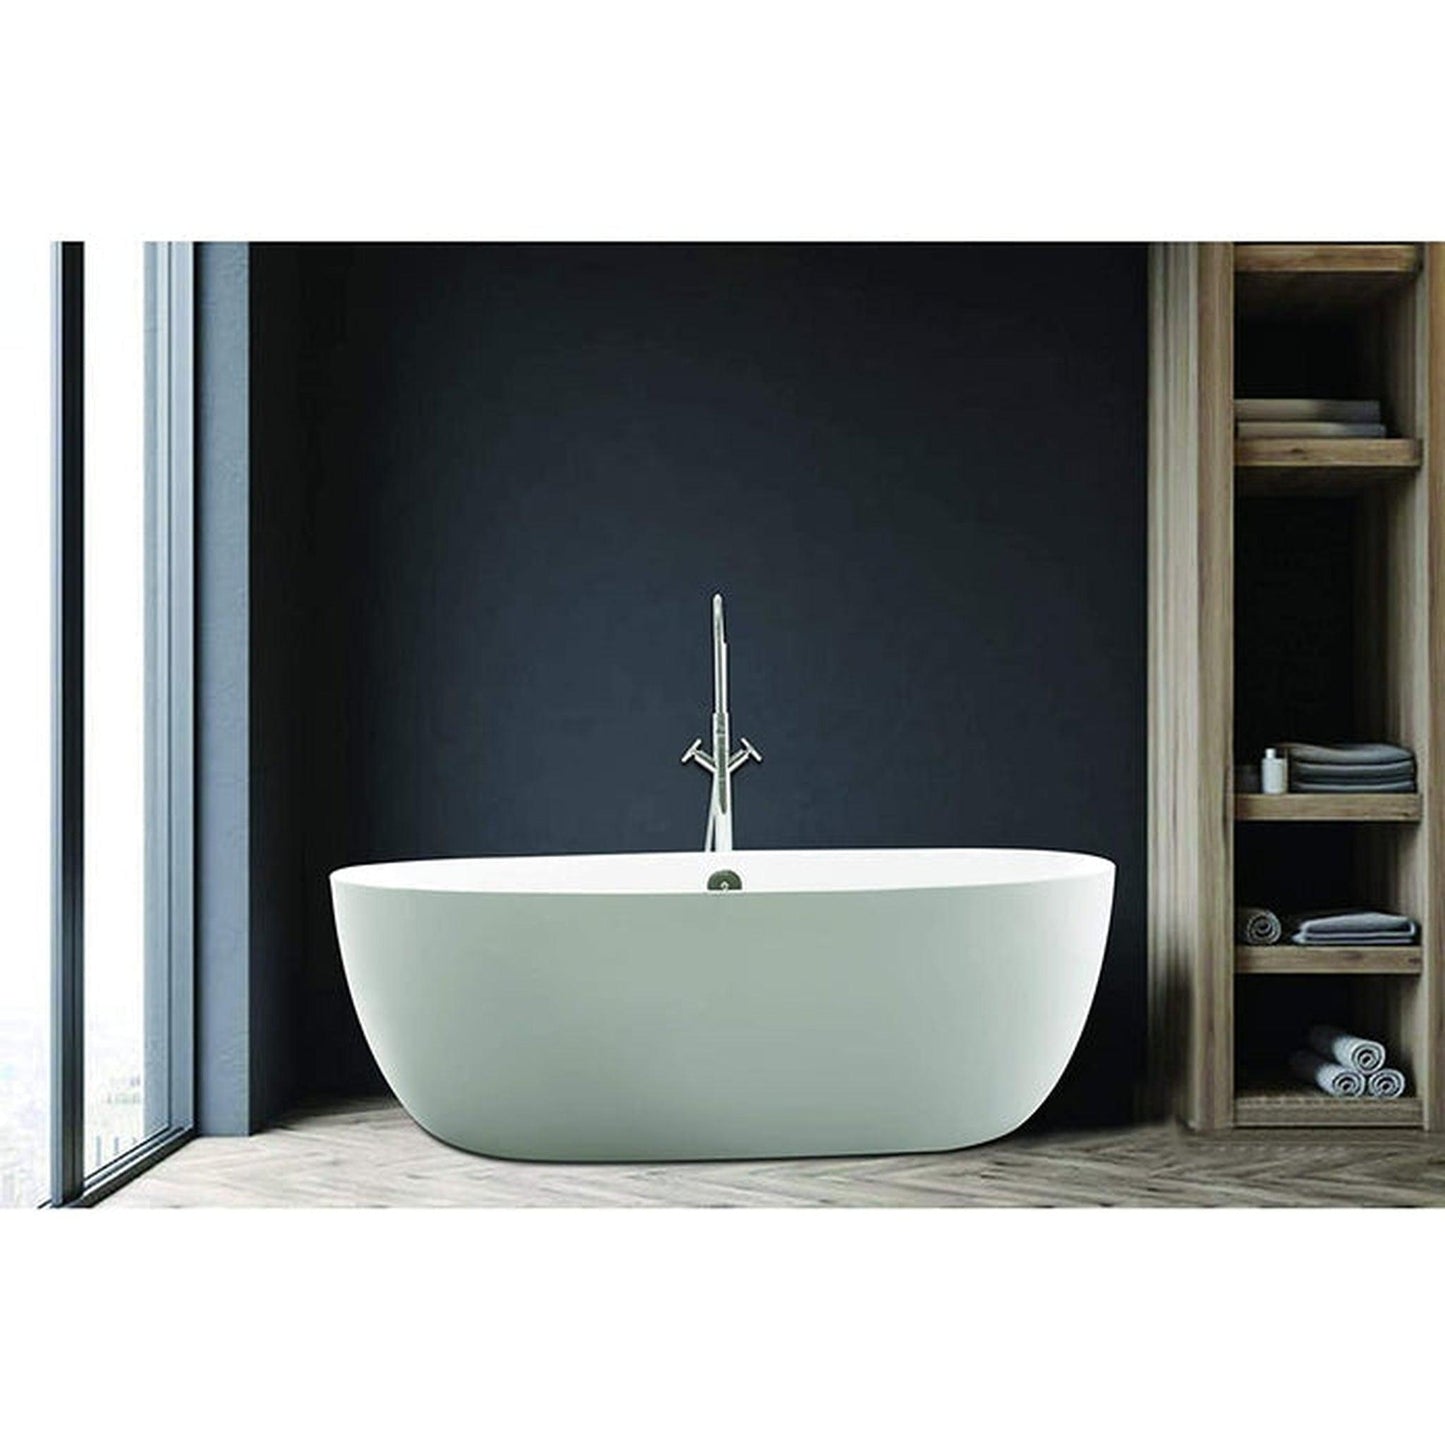 Vanity Art 67" White Modern Stand Alone Soaking Tub With Chrome Round Overflow Pop-up Drain